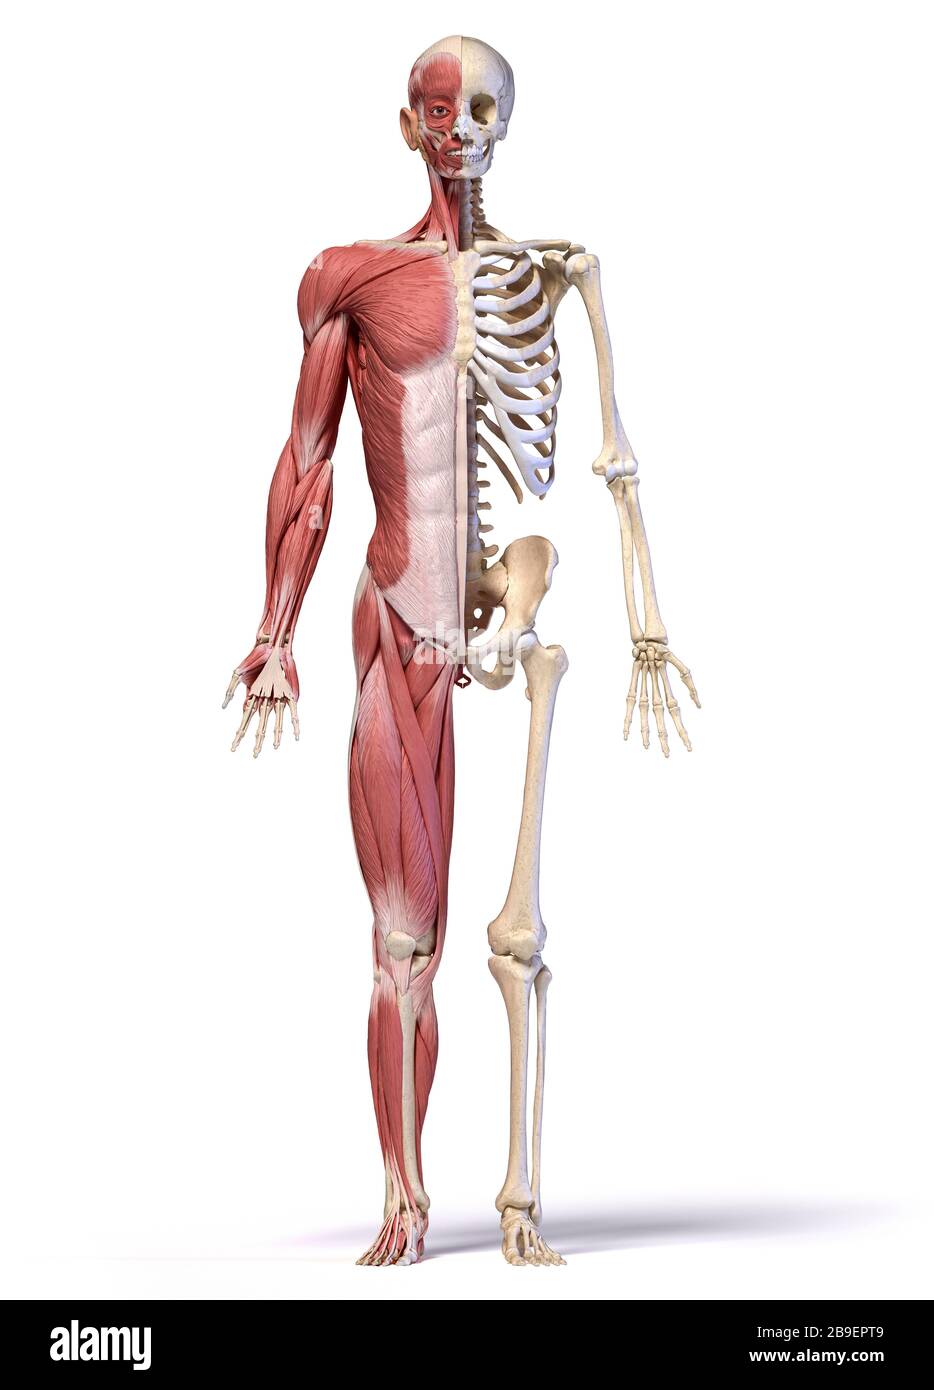 Anatomy of human male muscular and skeletal systems, front view, white background. Stock Photo